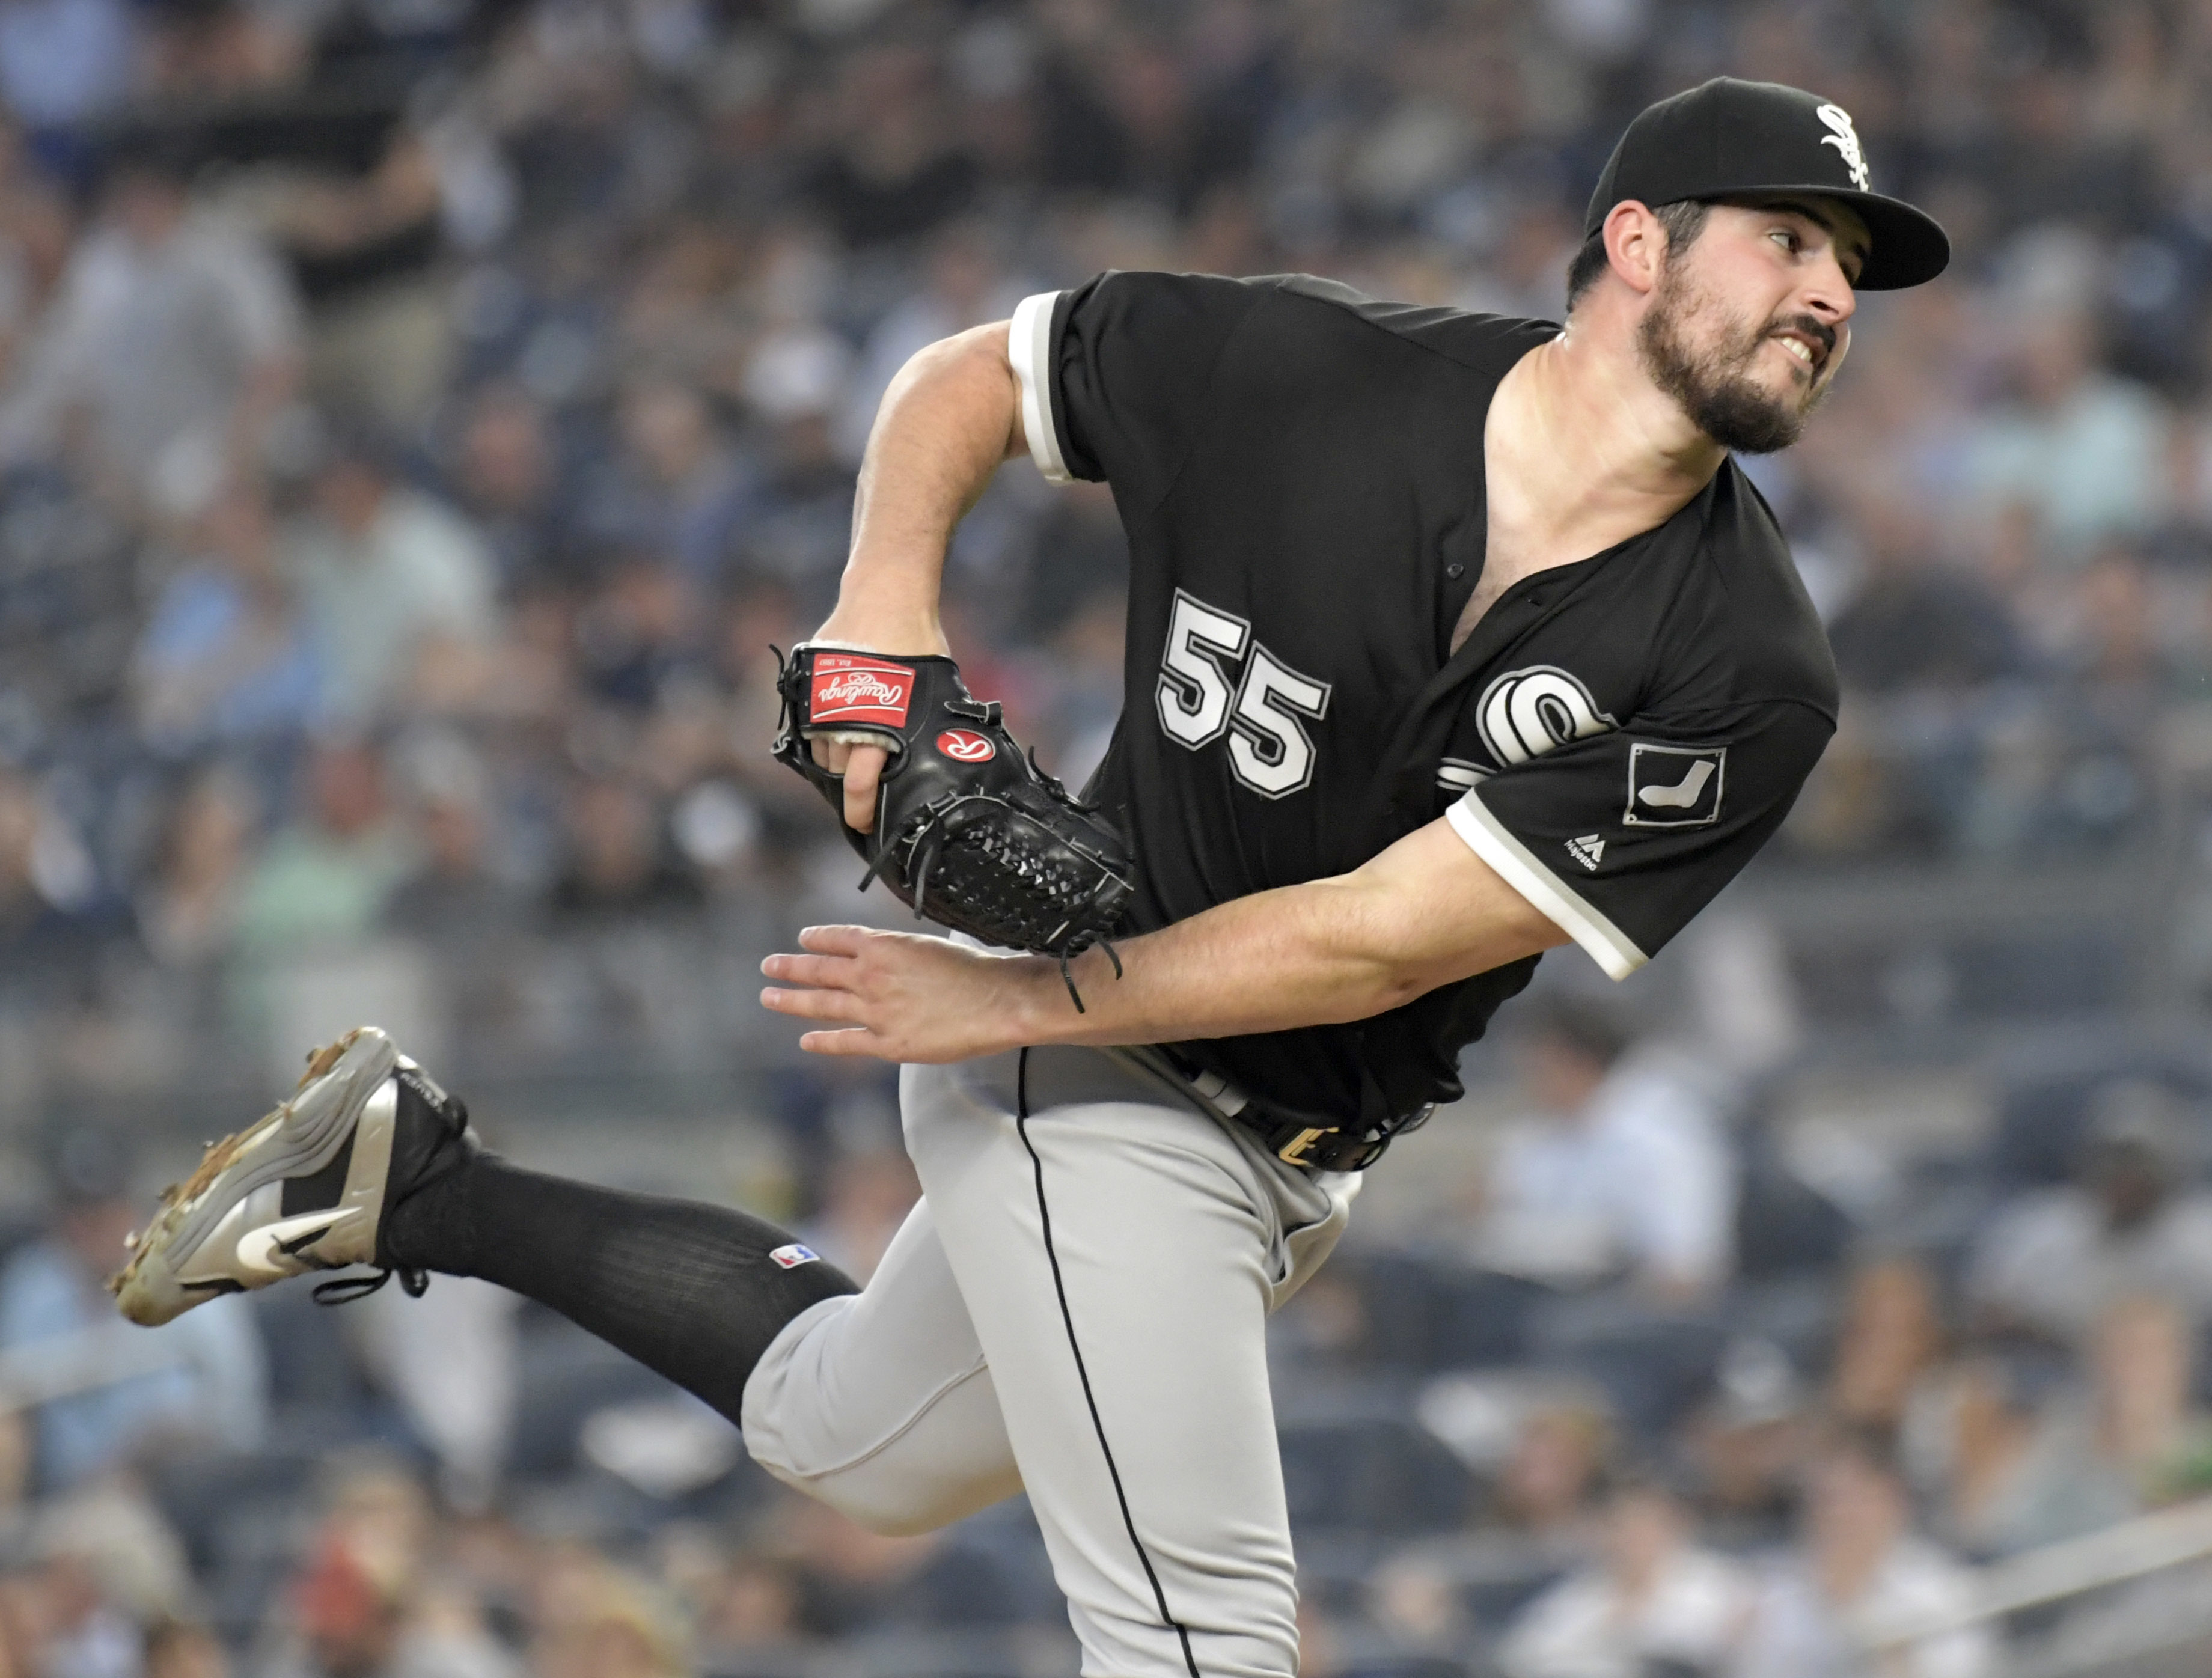 Rodon, White Sox keep rolling with 6-2 win over Yanks